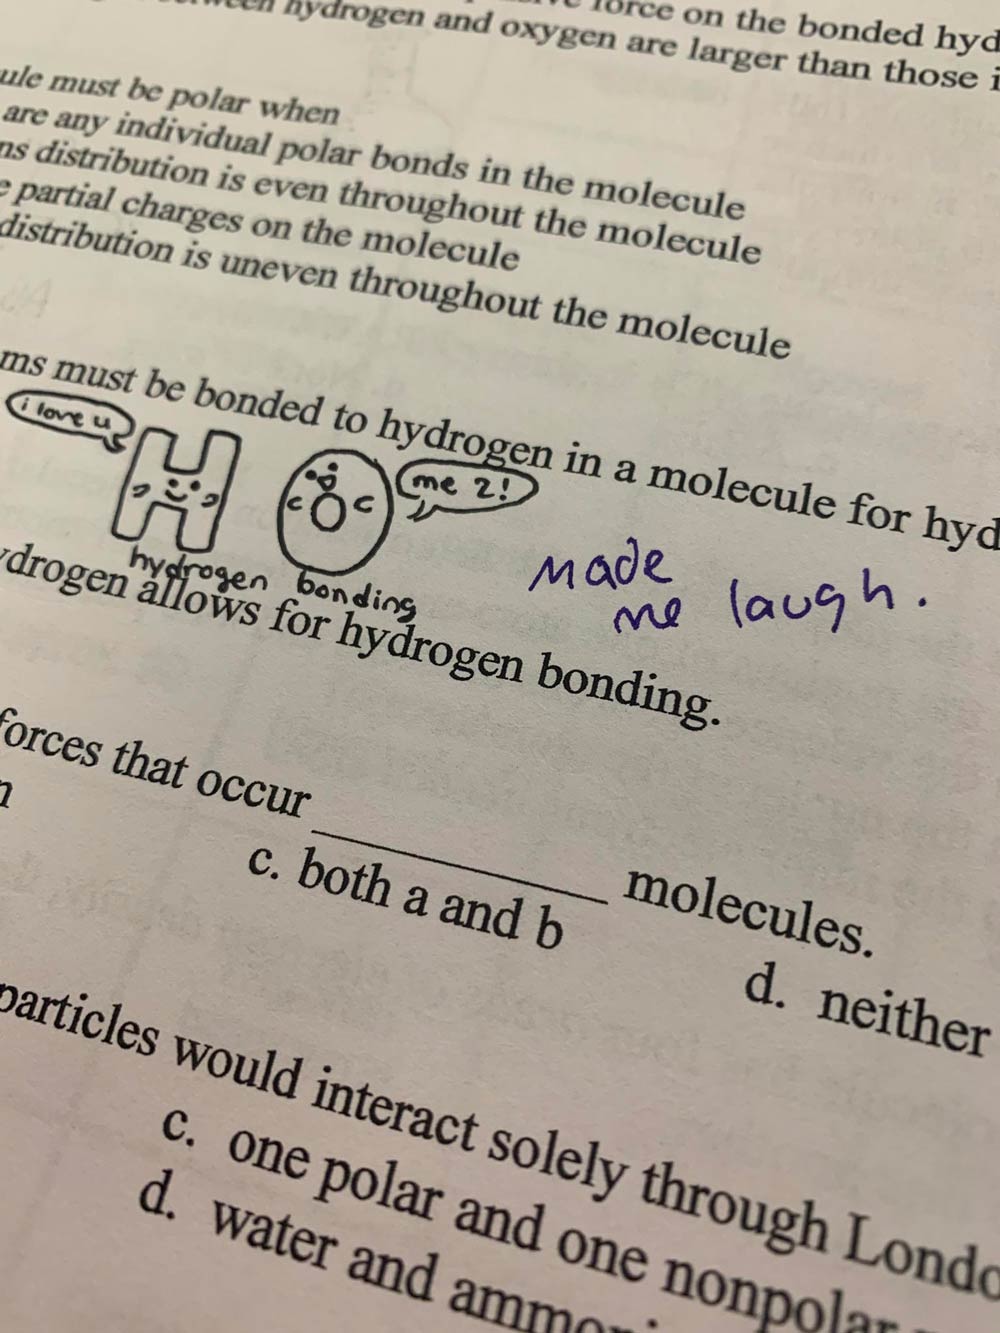 My chemistry teacher thought my drawing was funny